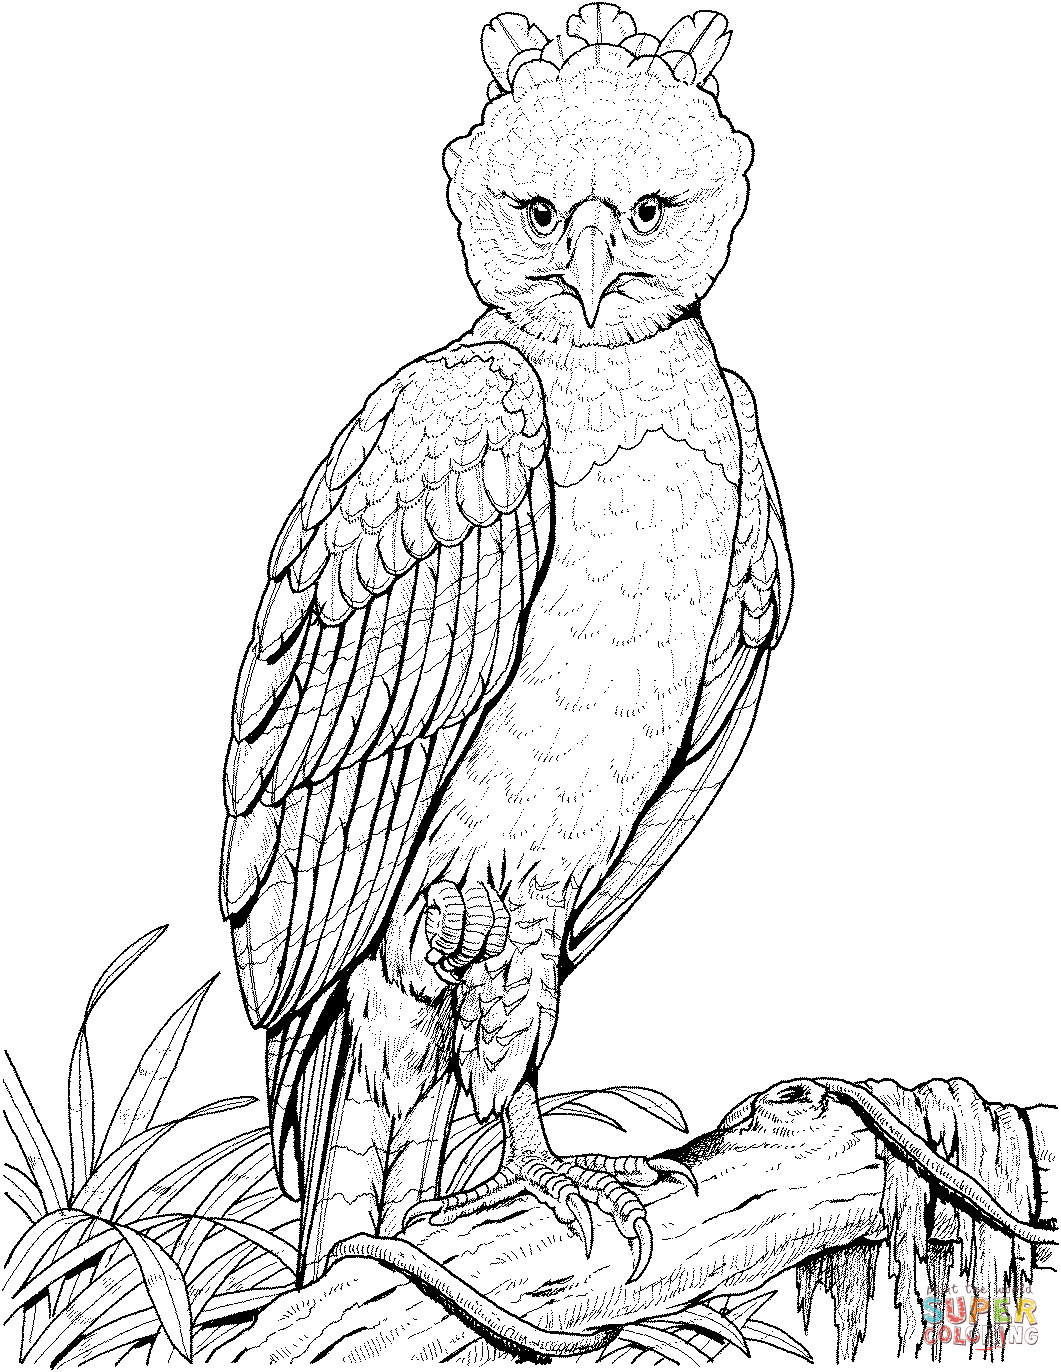 Harpy Eagle coloring #18, Download drawings